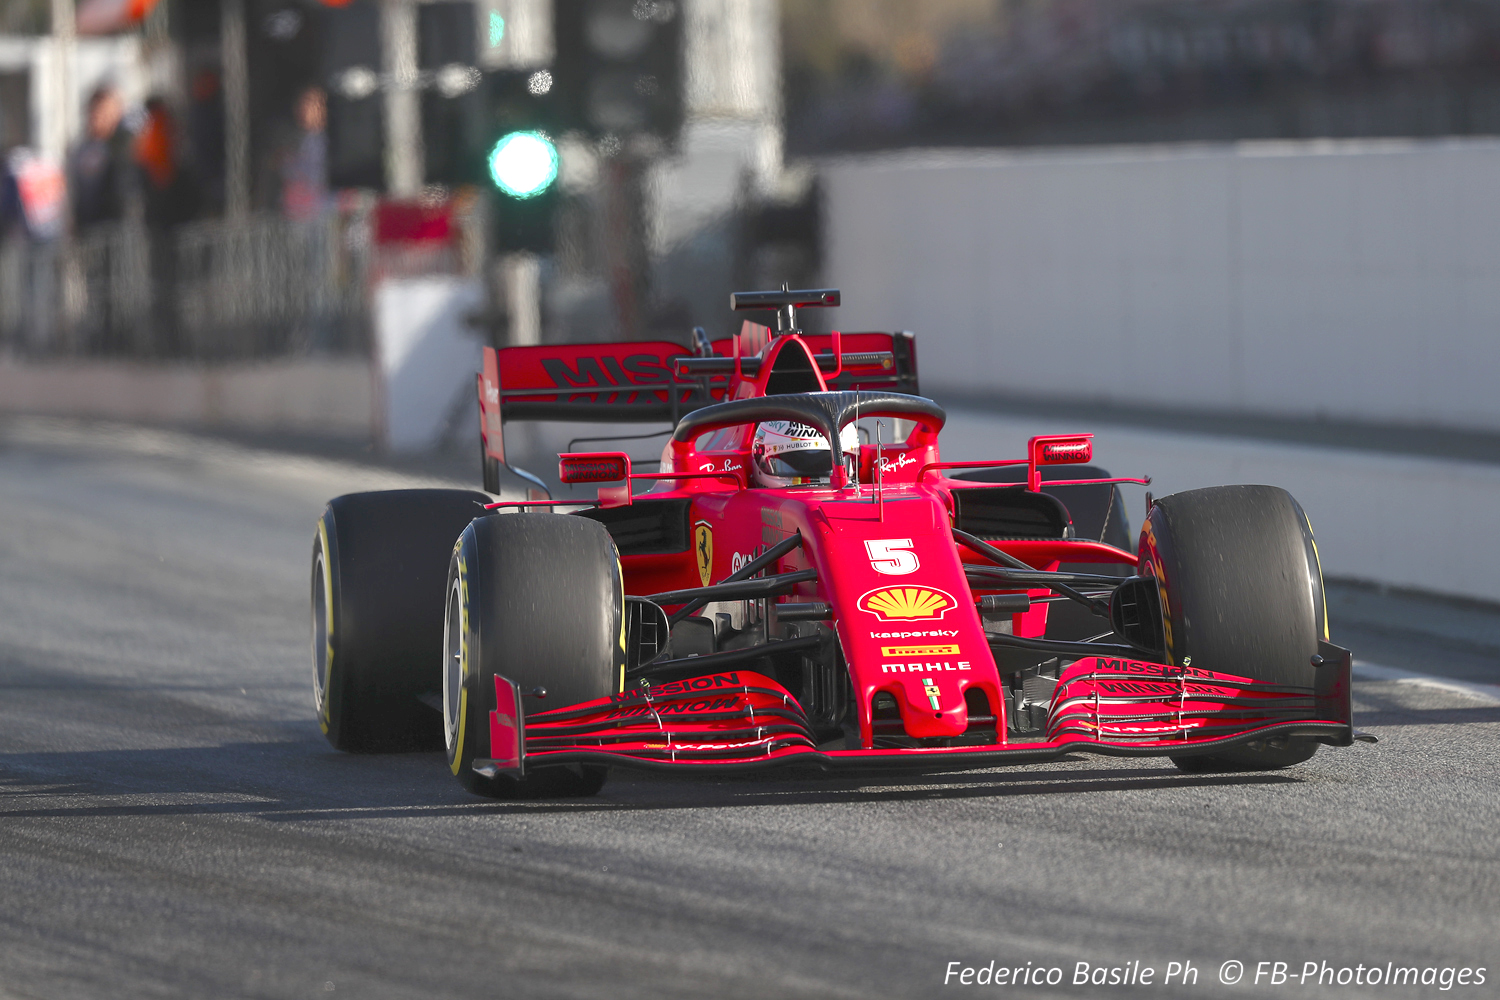 One thing is certain, the hapless Ferrari car won't be challenging the front runners